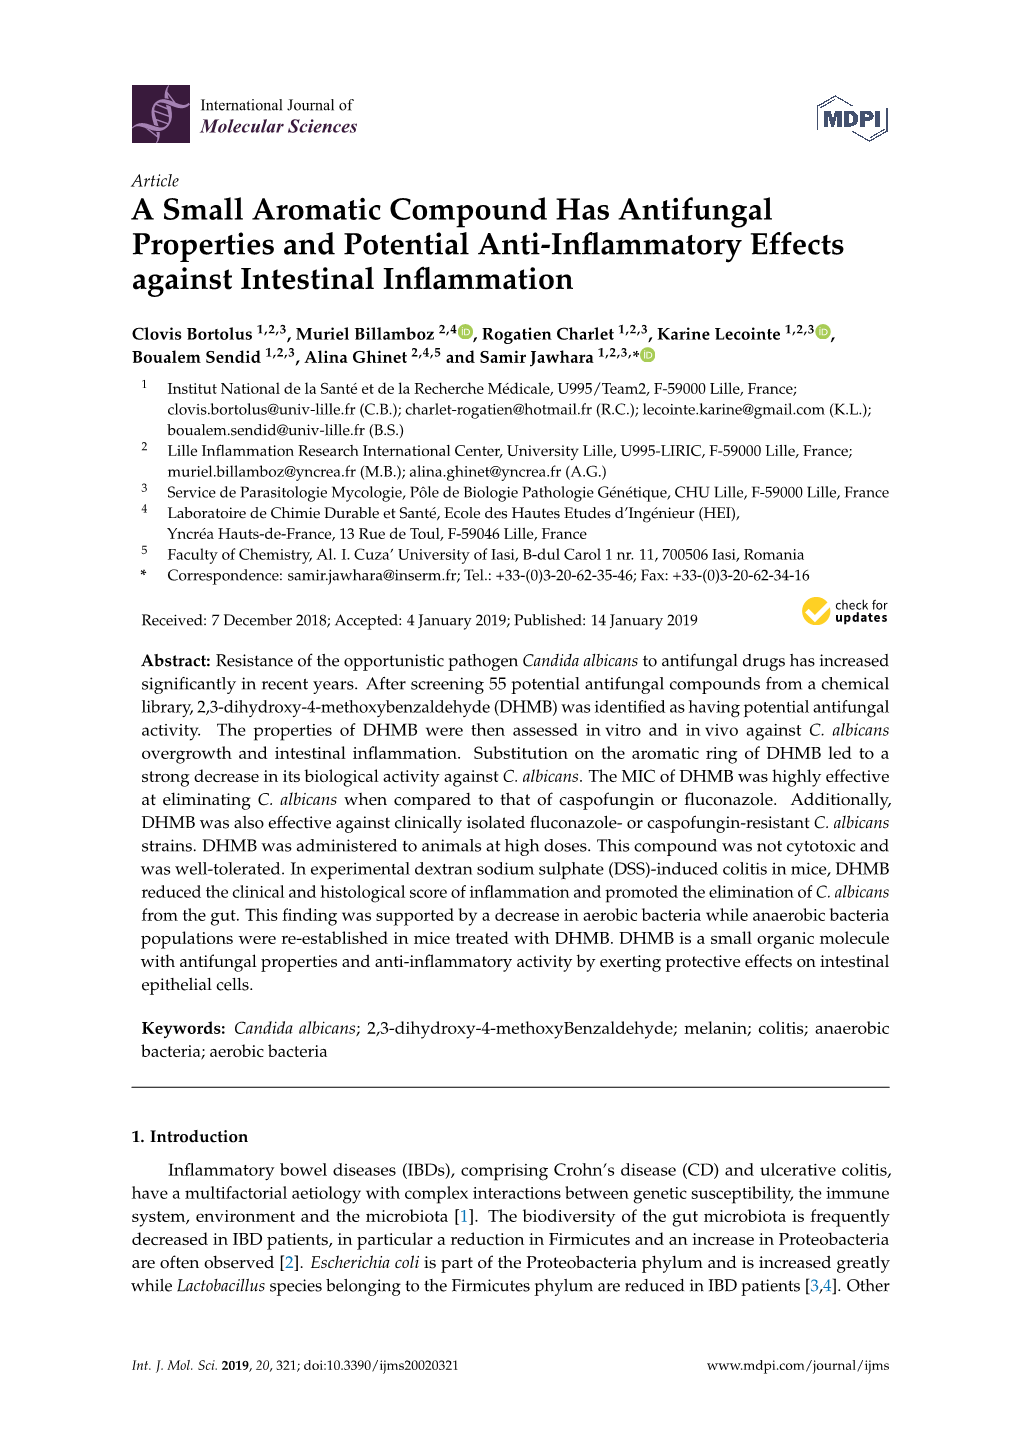 A Small Aromatic Compound Has Antifungal Properties and Potential Anti-Inﬂammatory Effects Against Intestinal Inﬂammation